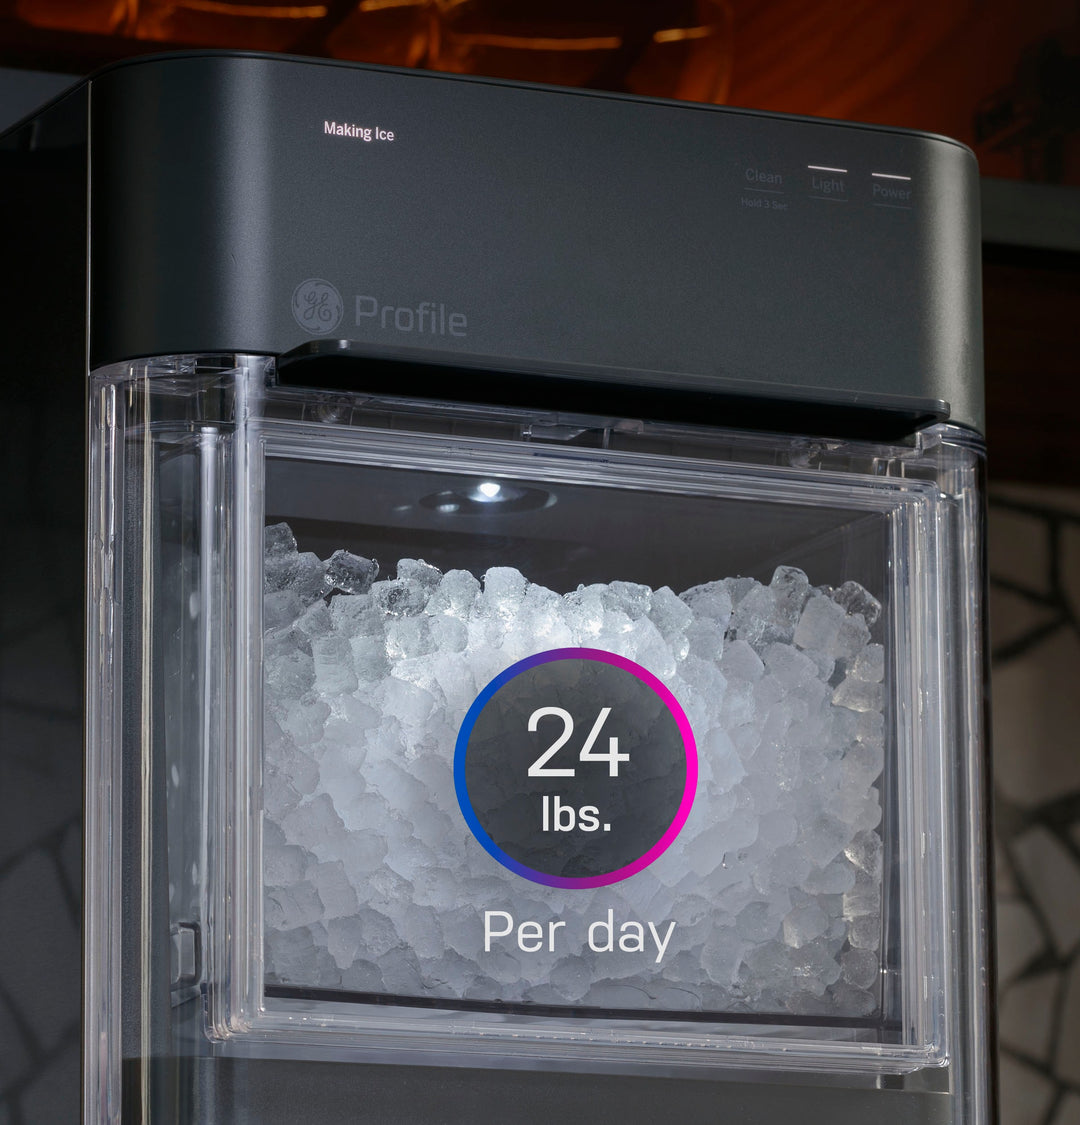 GE Profile - Opal 2.0 24 lb. Portable Ice maker with Nugget Ice Production and Built-In WiFi - Stainless steel_12